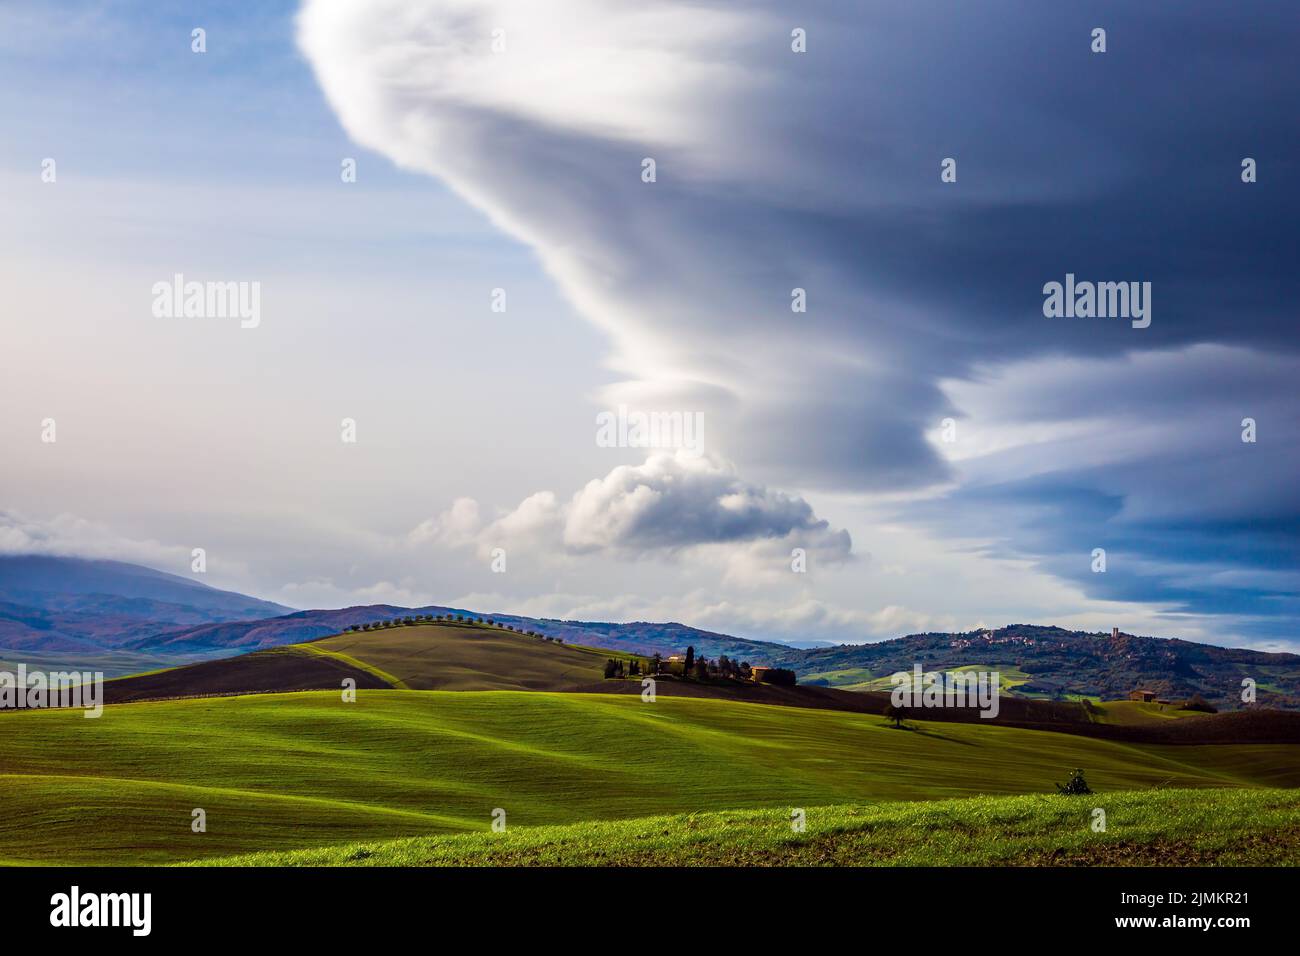 Gorgeous  clouds over Tuscany hills Stock Photo